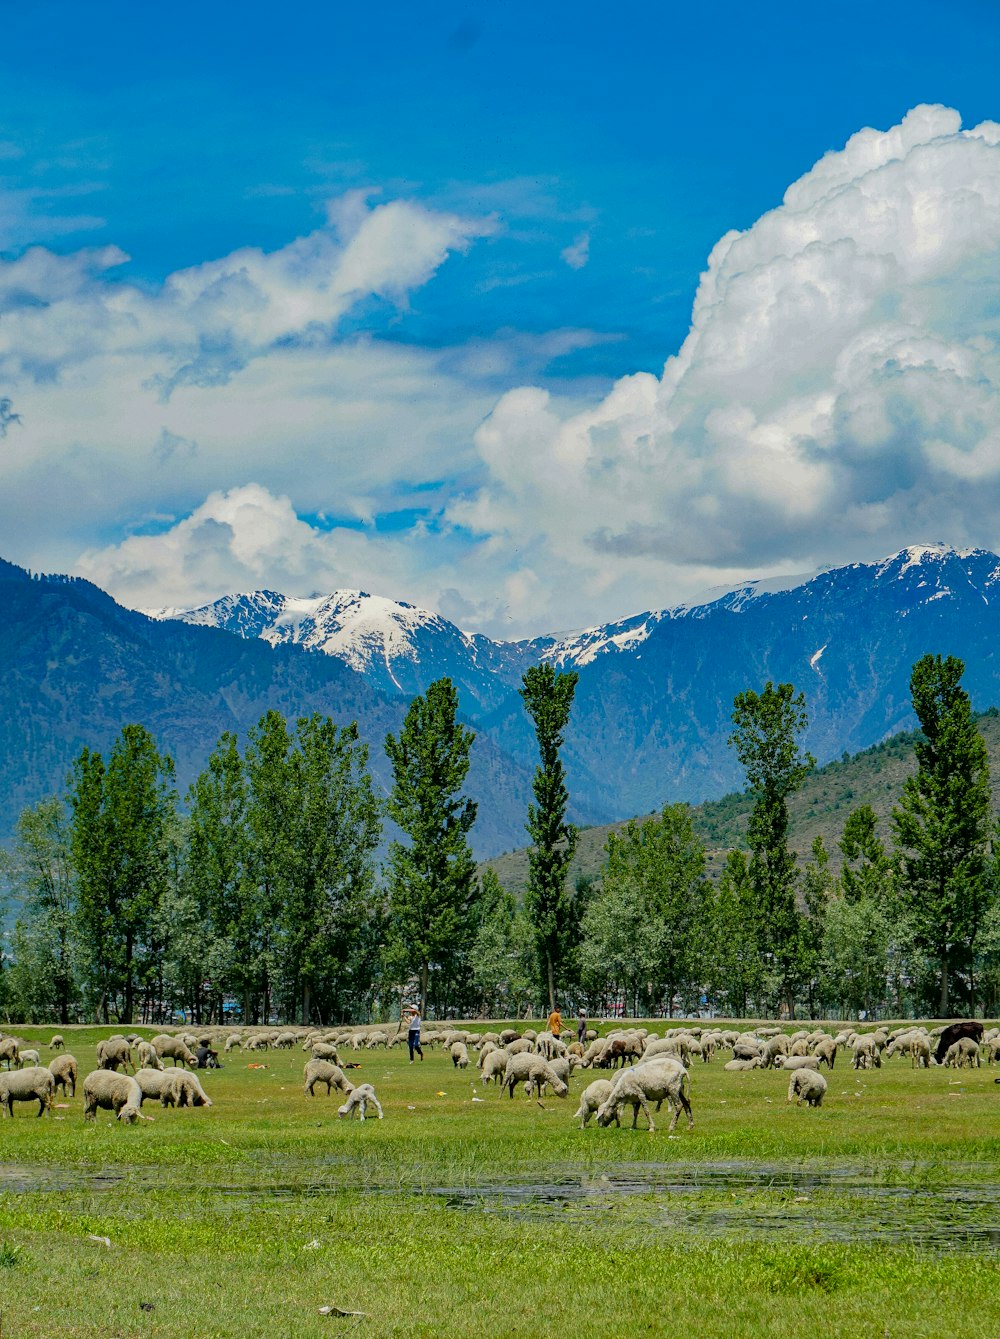 herd of sheep on green grass field near green trees under white clouds and blue sky